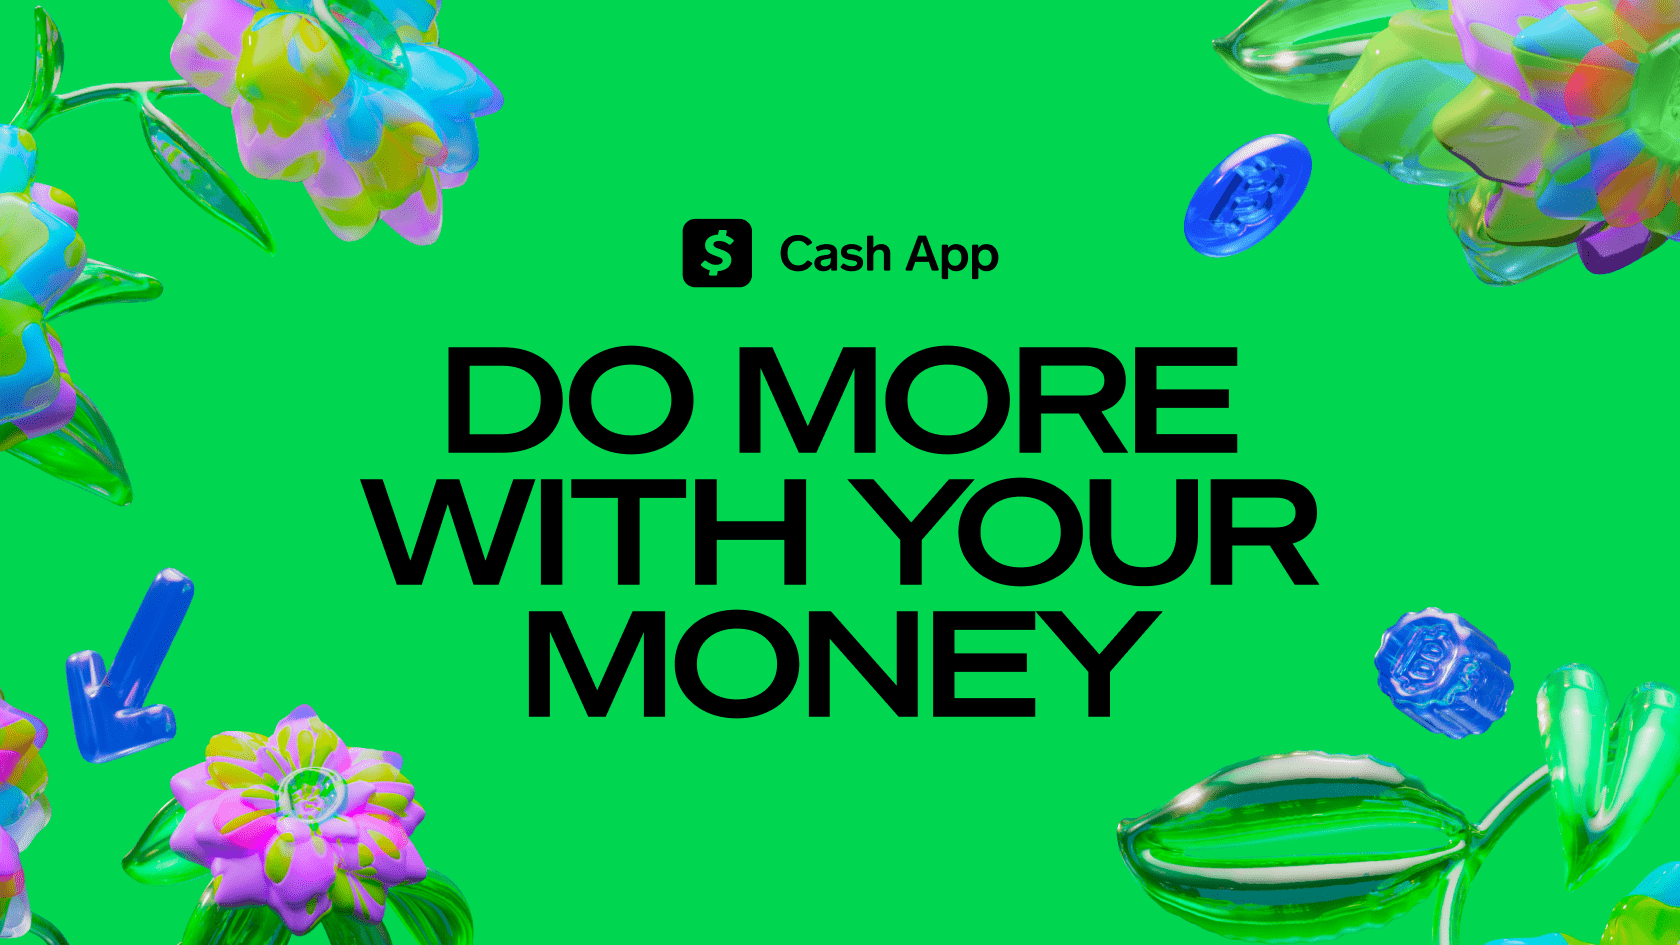 Ready go to ... https://cash.app/ [ Cash App - Do more with your money]